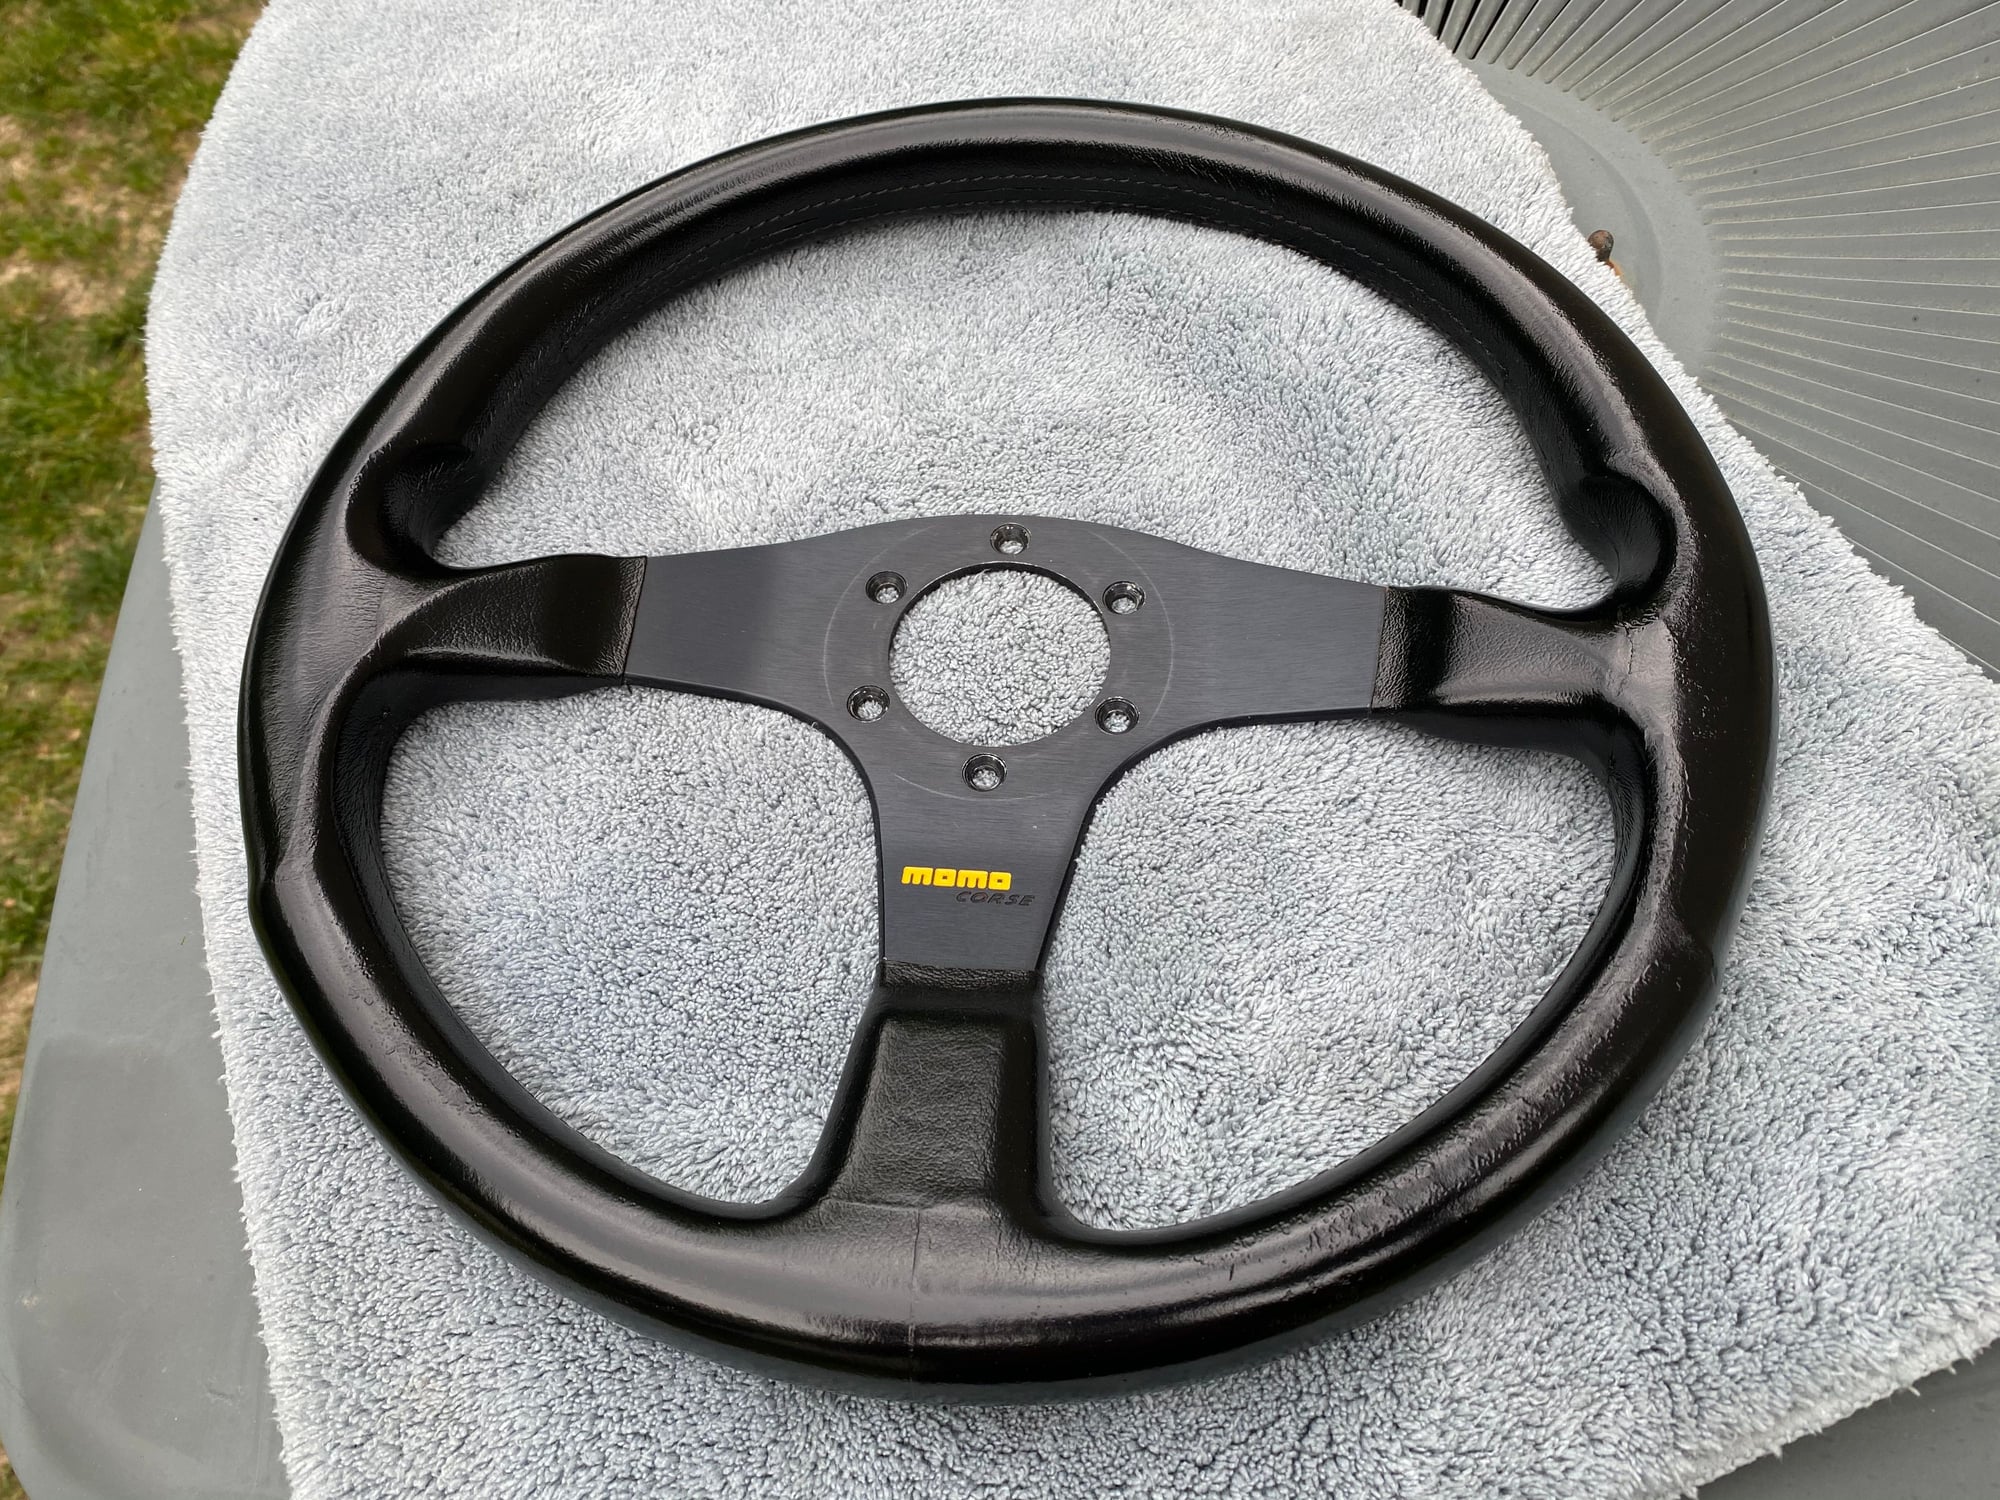 Accessories - Momo Corse steering wheel - Used - 1986 to 1995 Mazda RX-7 - Prince Frederick, MD 20678, United States